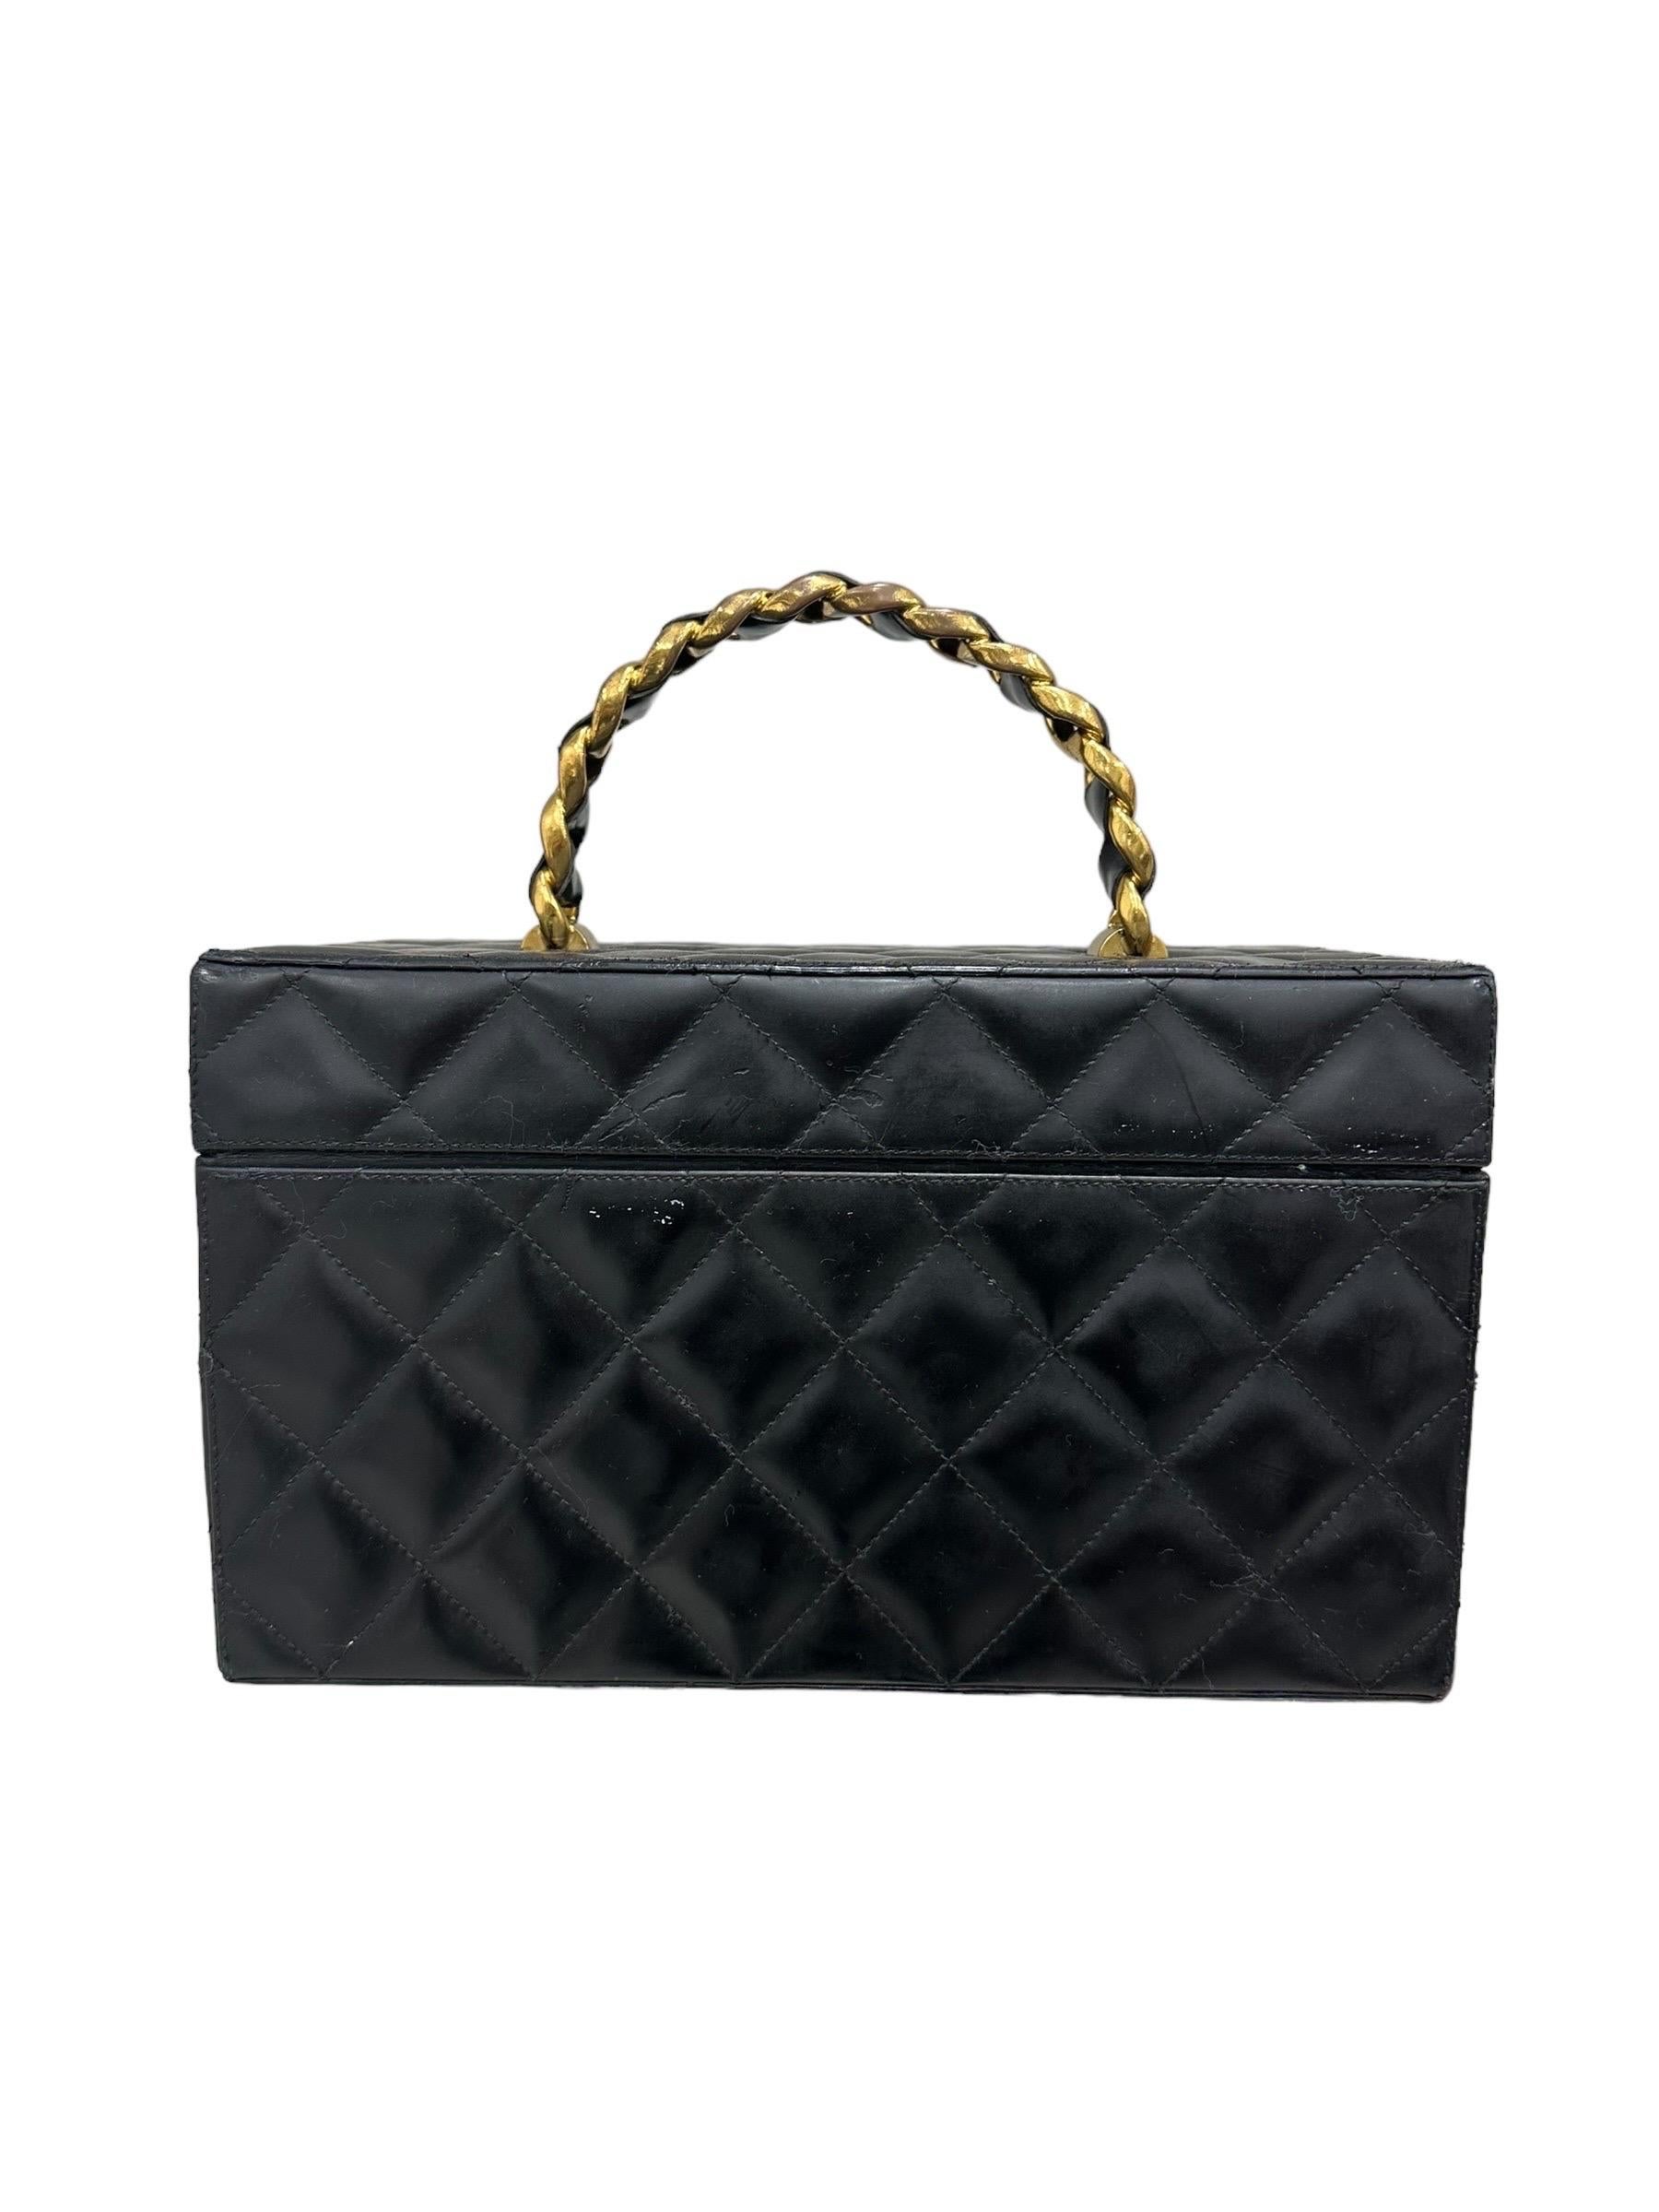 Chanel Beauty Vintage Timaless Pelle Nera For Sale 4